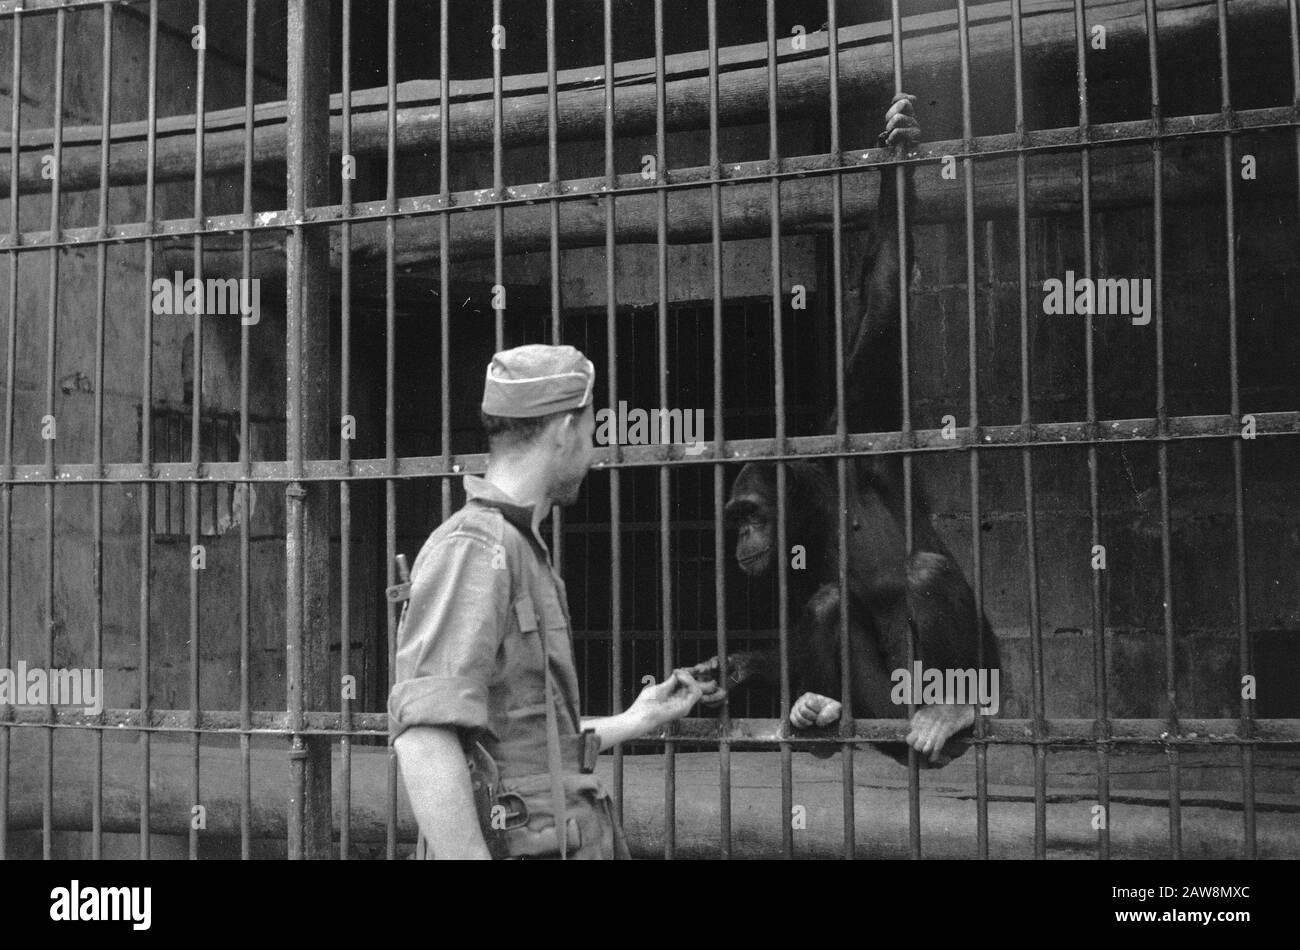 march to Fort van der Capellen and Fort de Kock (Anei Gorge)  [Dutch soldier with a chimpanzee in a zoo?] Date: December 29 1948 Location: Bukittinggi, Indonesia, Dutch East Indies, Sumatra Stock Photo